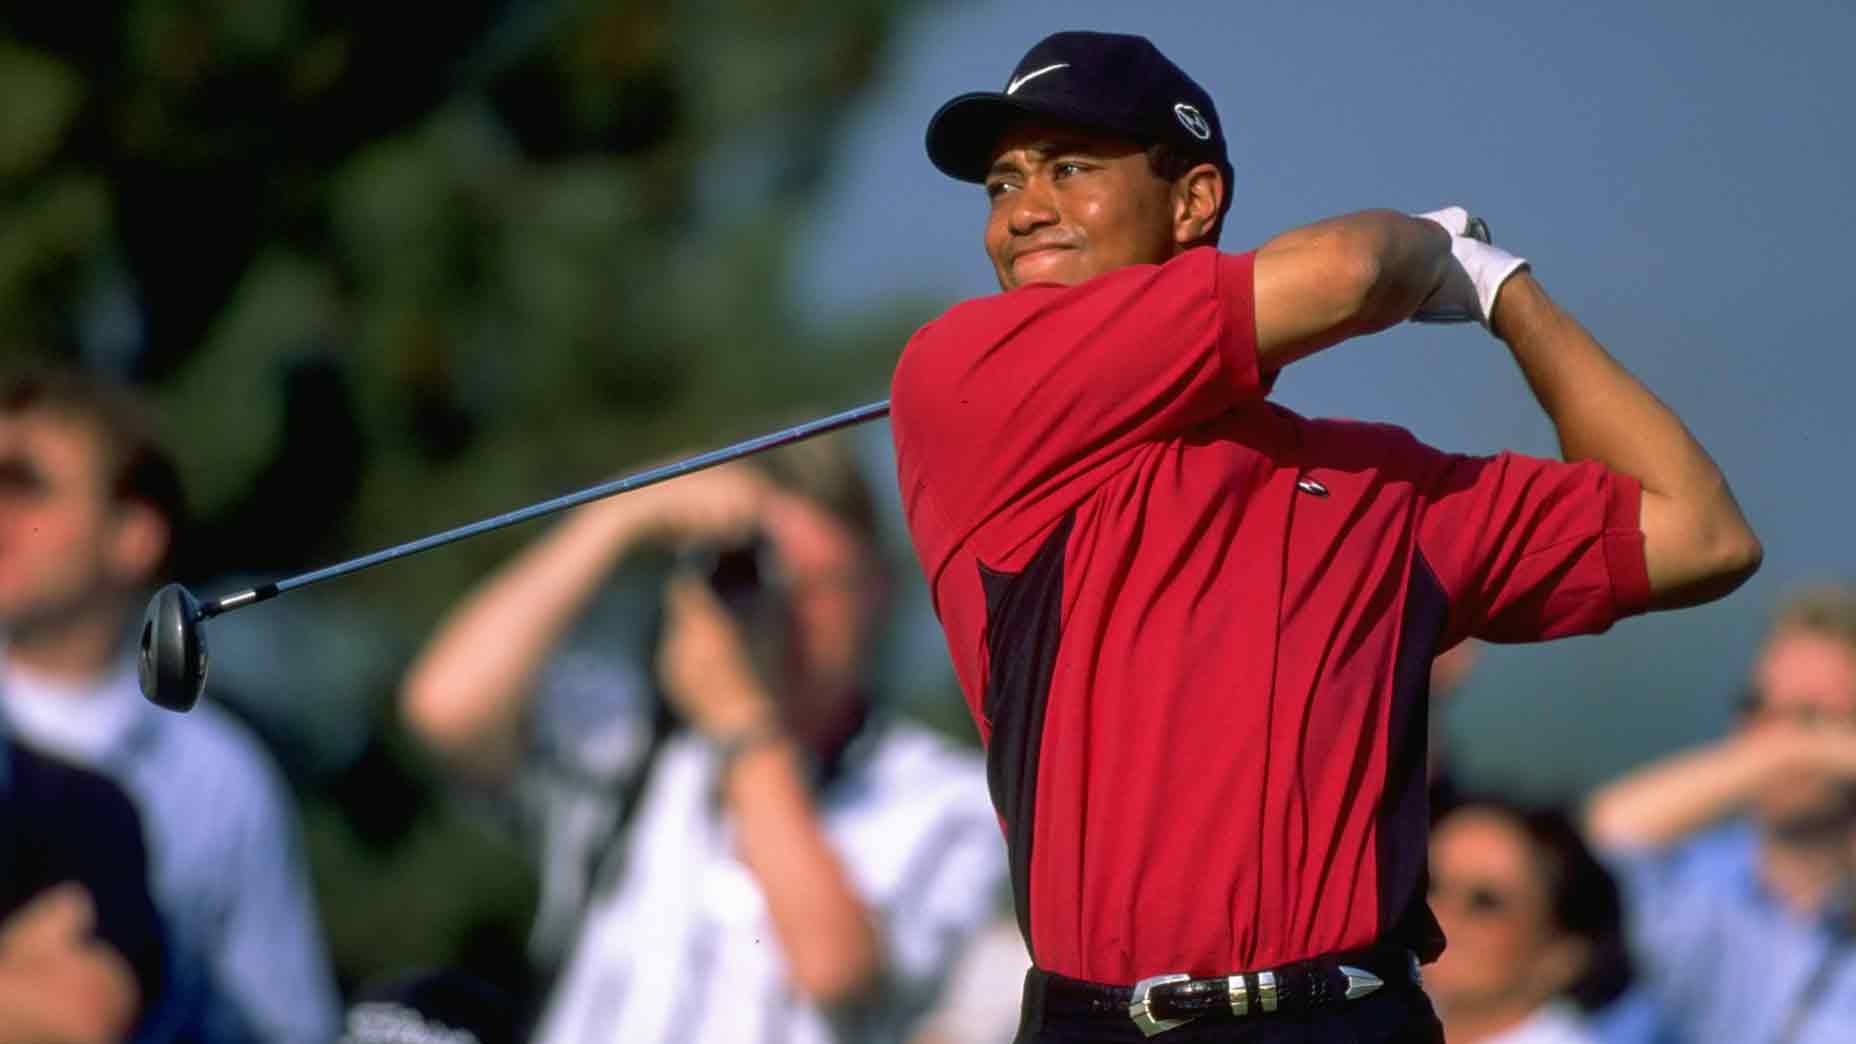 In this vintage clip of Tiger Woods, the 15-time major champ explains the mistake he sees amateurs often make when hitting their driver